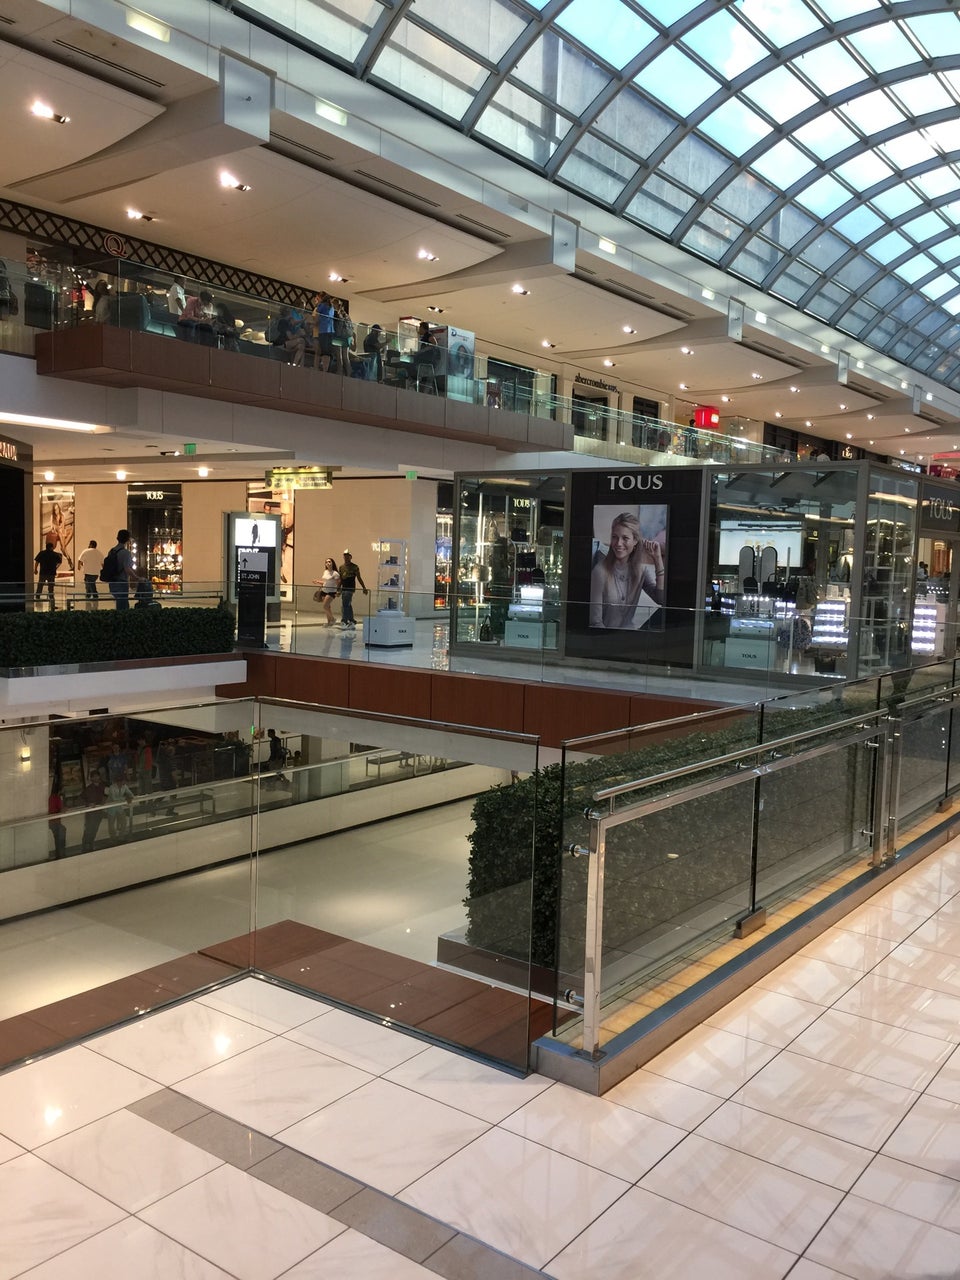 Houston's Galleria mall getting more retailers in fall, winter